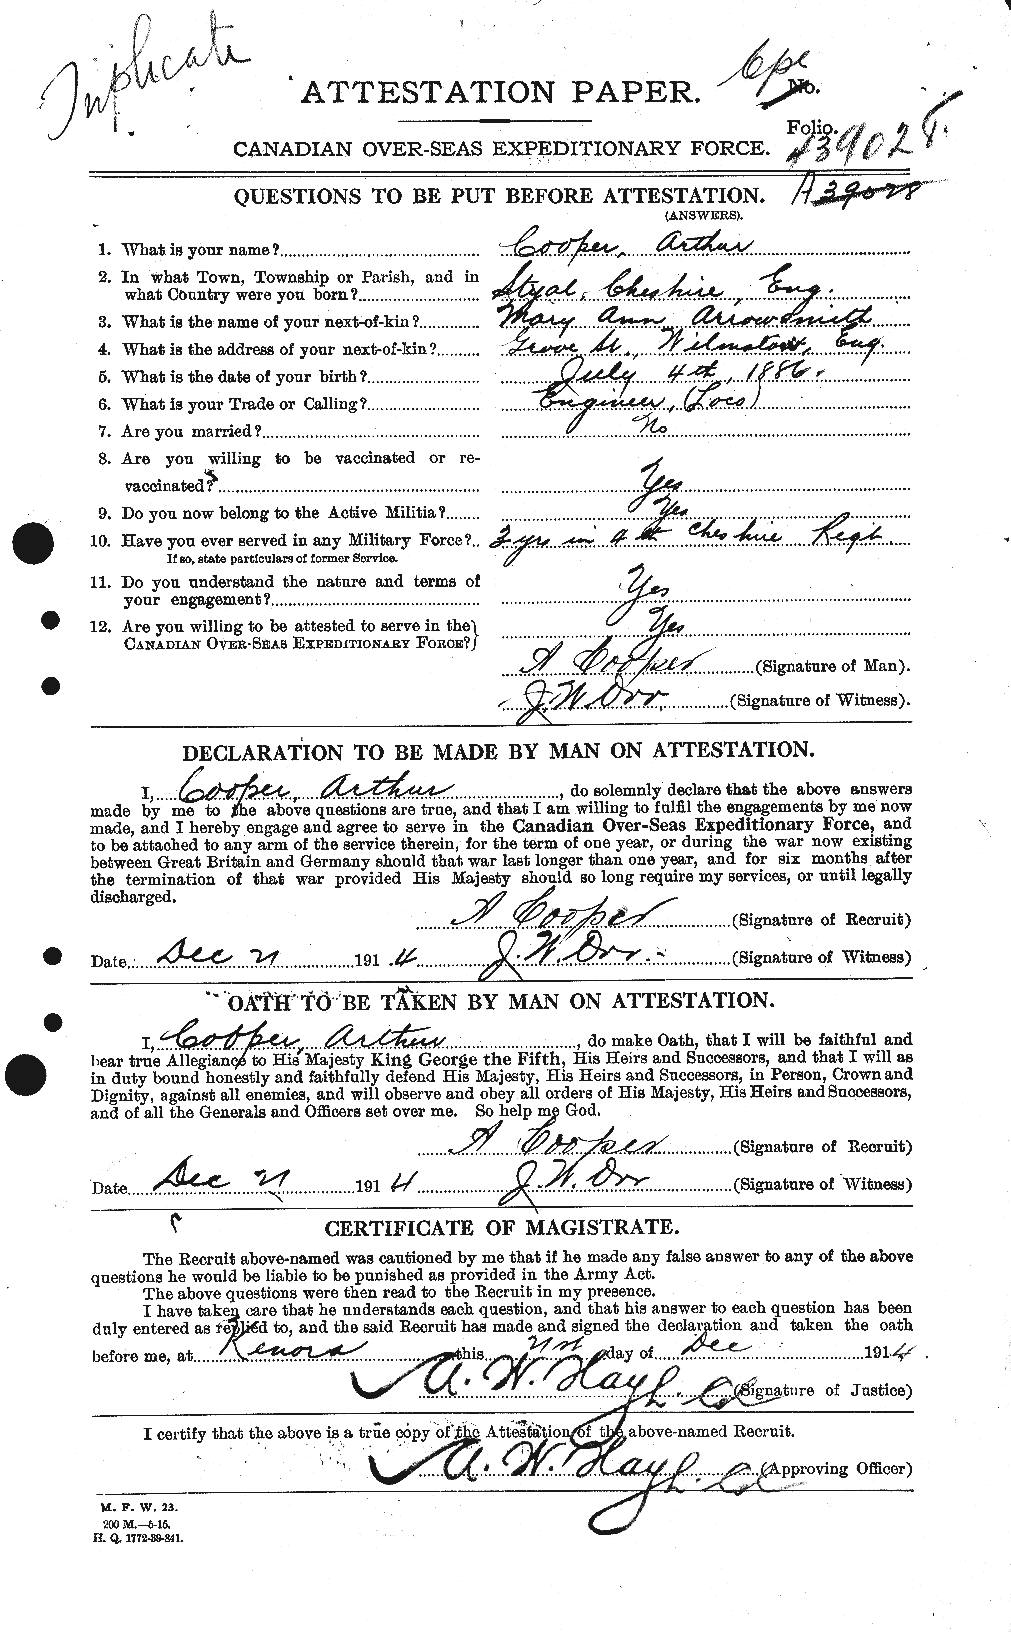 Personnel Records of the First World War - CEF 054595a